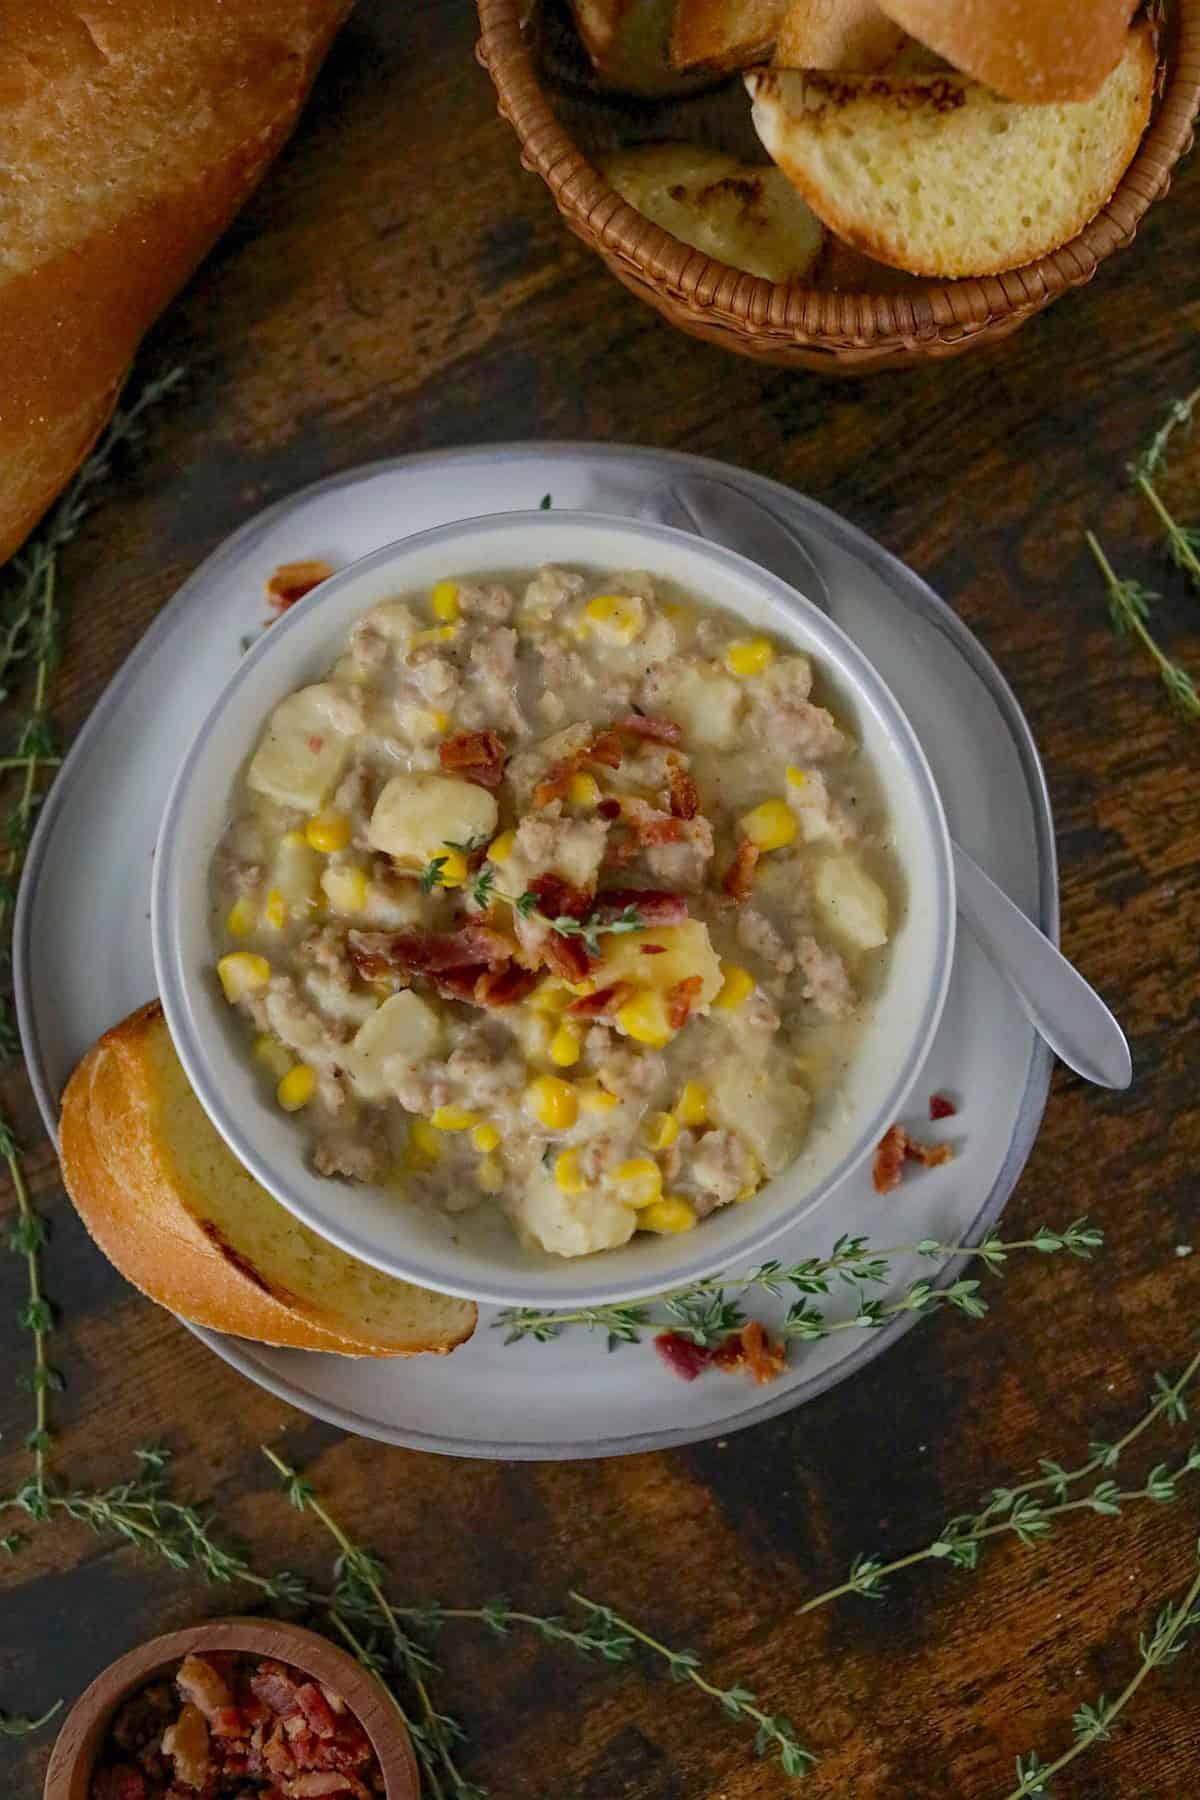 Bowl of corn chowder with sausage in a white bowl on a wood table.